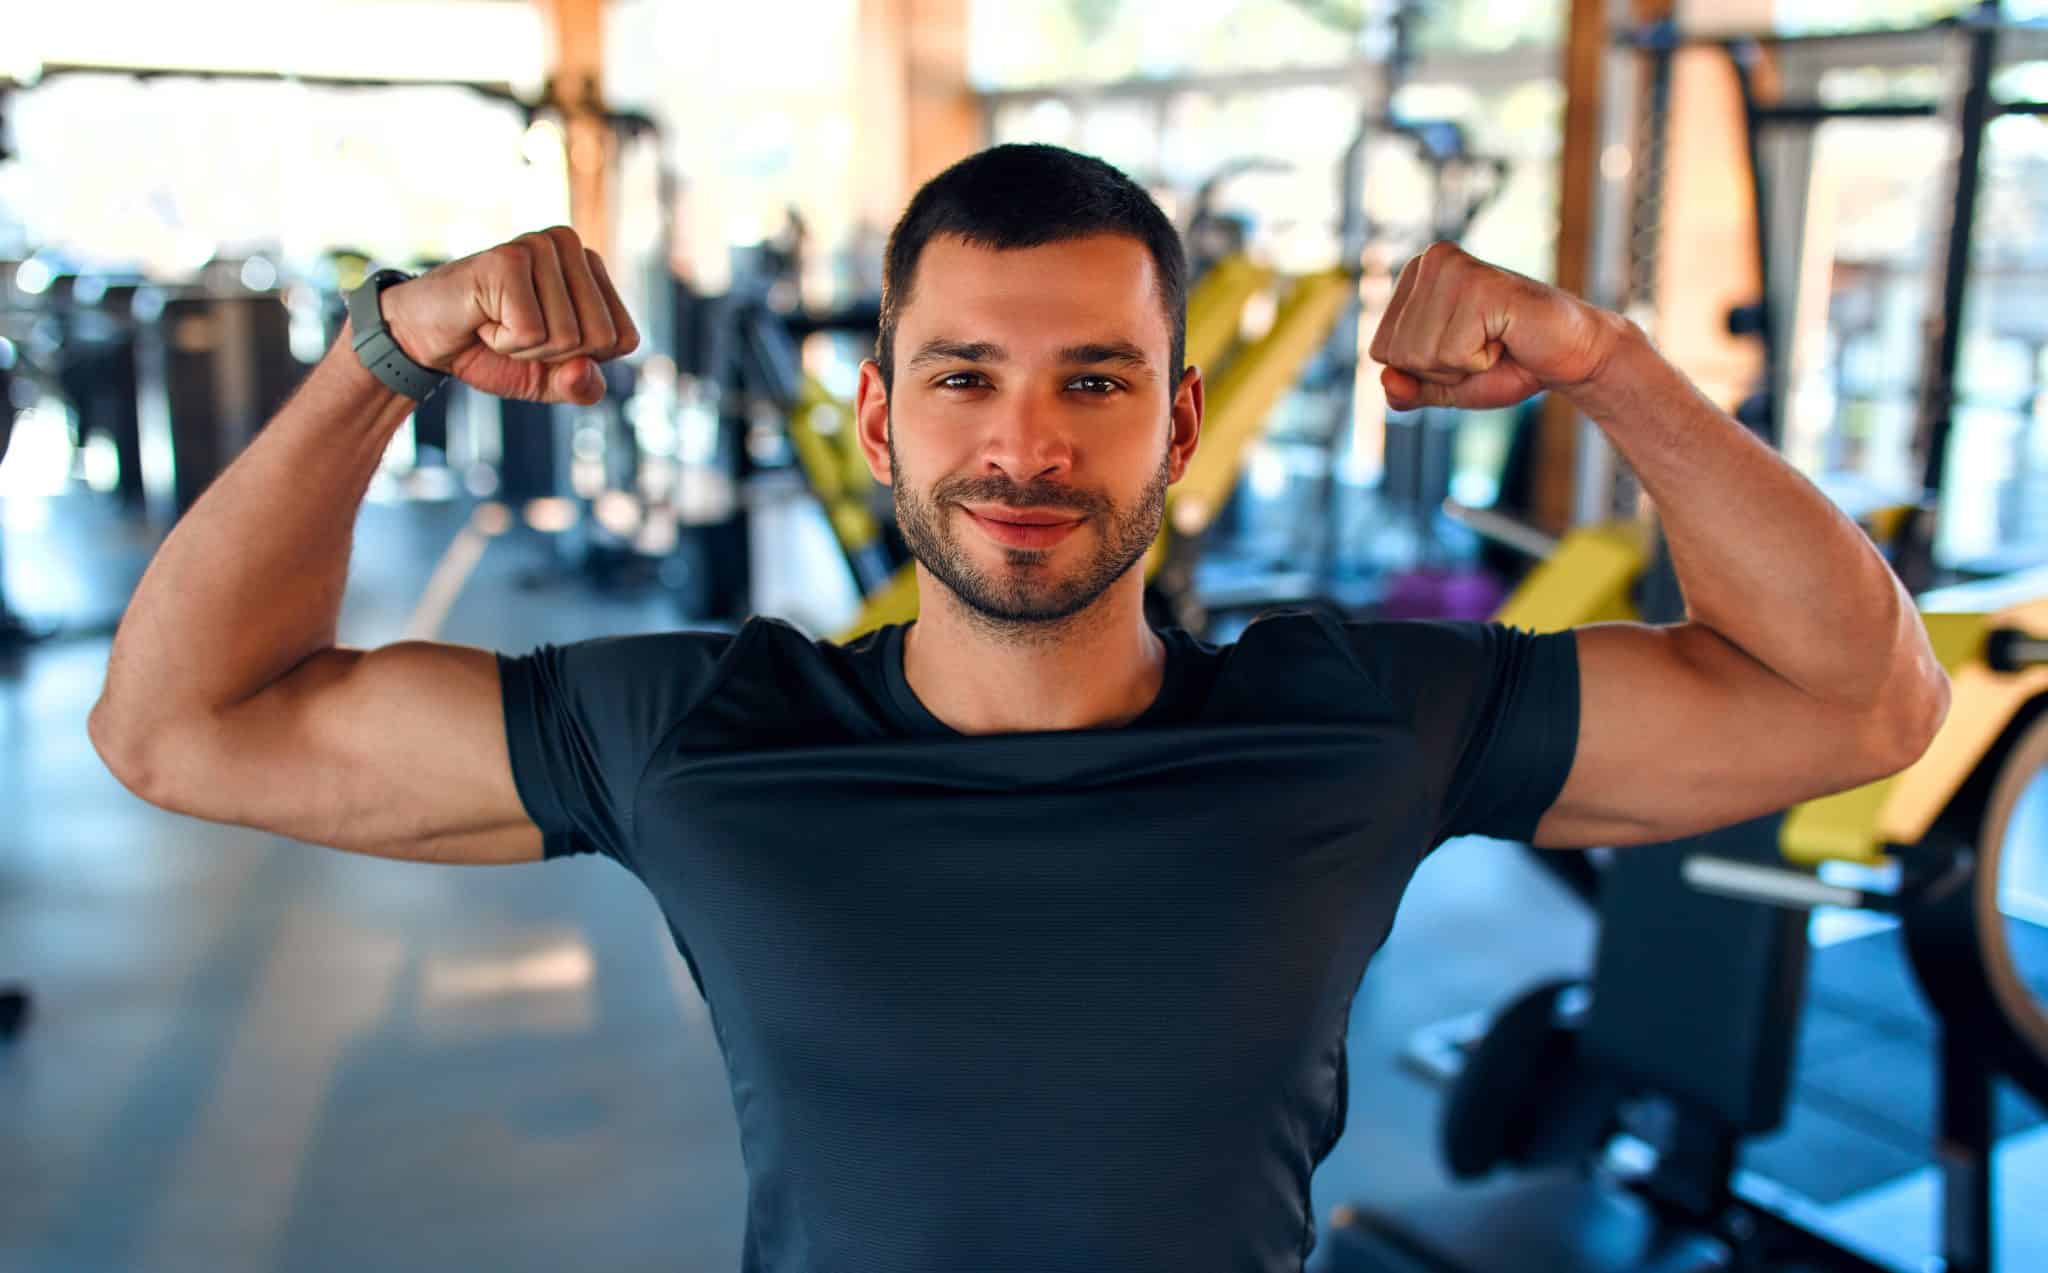 A man flexing his arm muscles and smiling inside a gym.